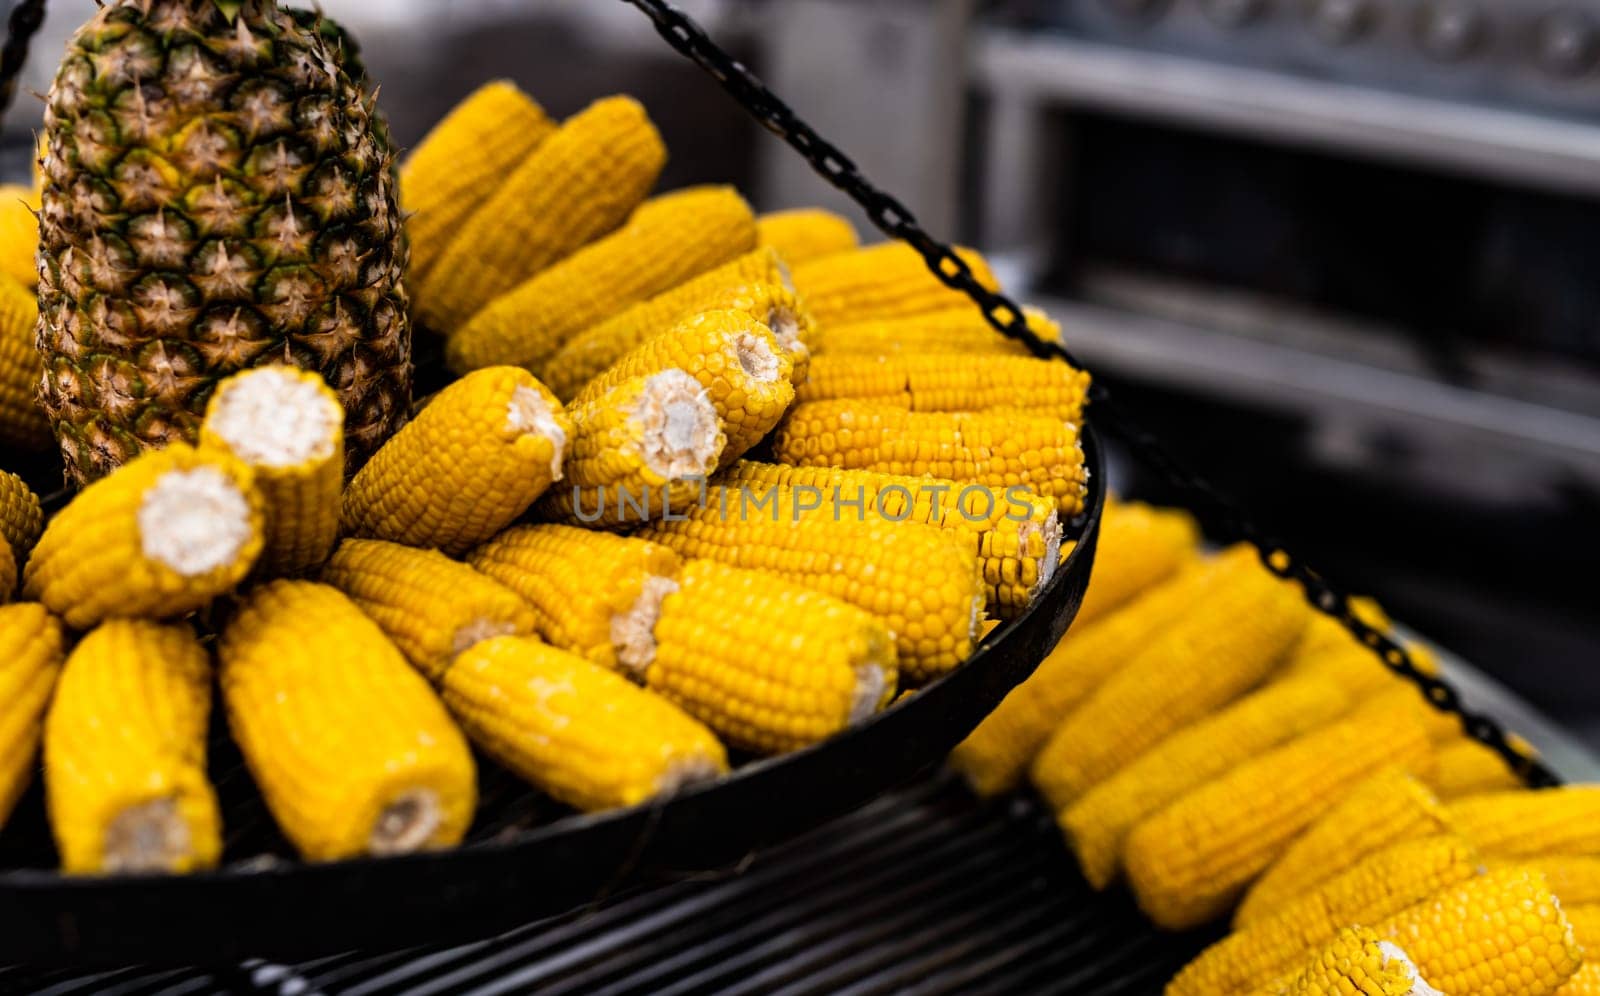 Boiled corn and pineapple at street food market closeup. Fresh yellow vegetables maize and fruits at traditional fair festival